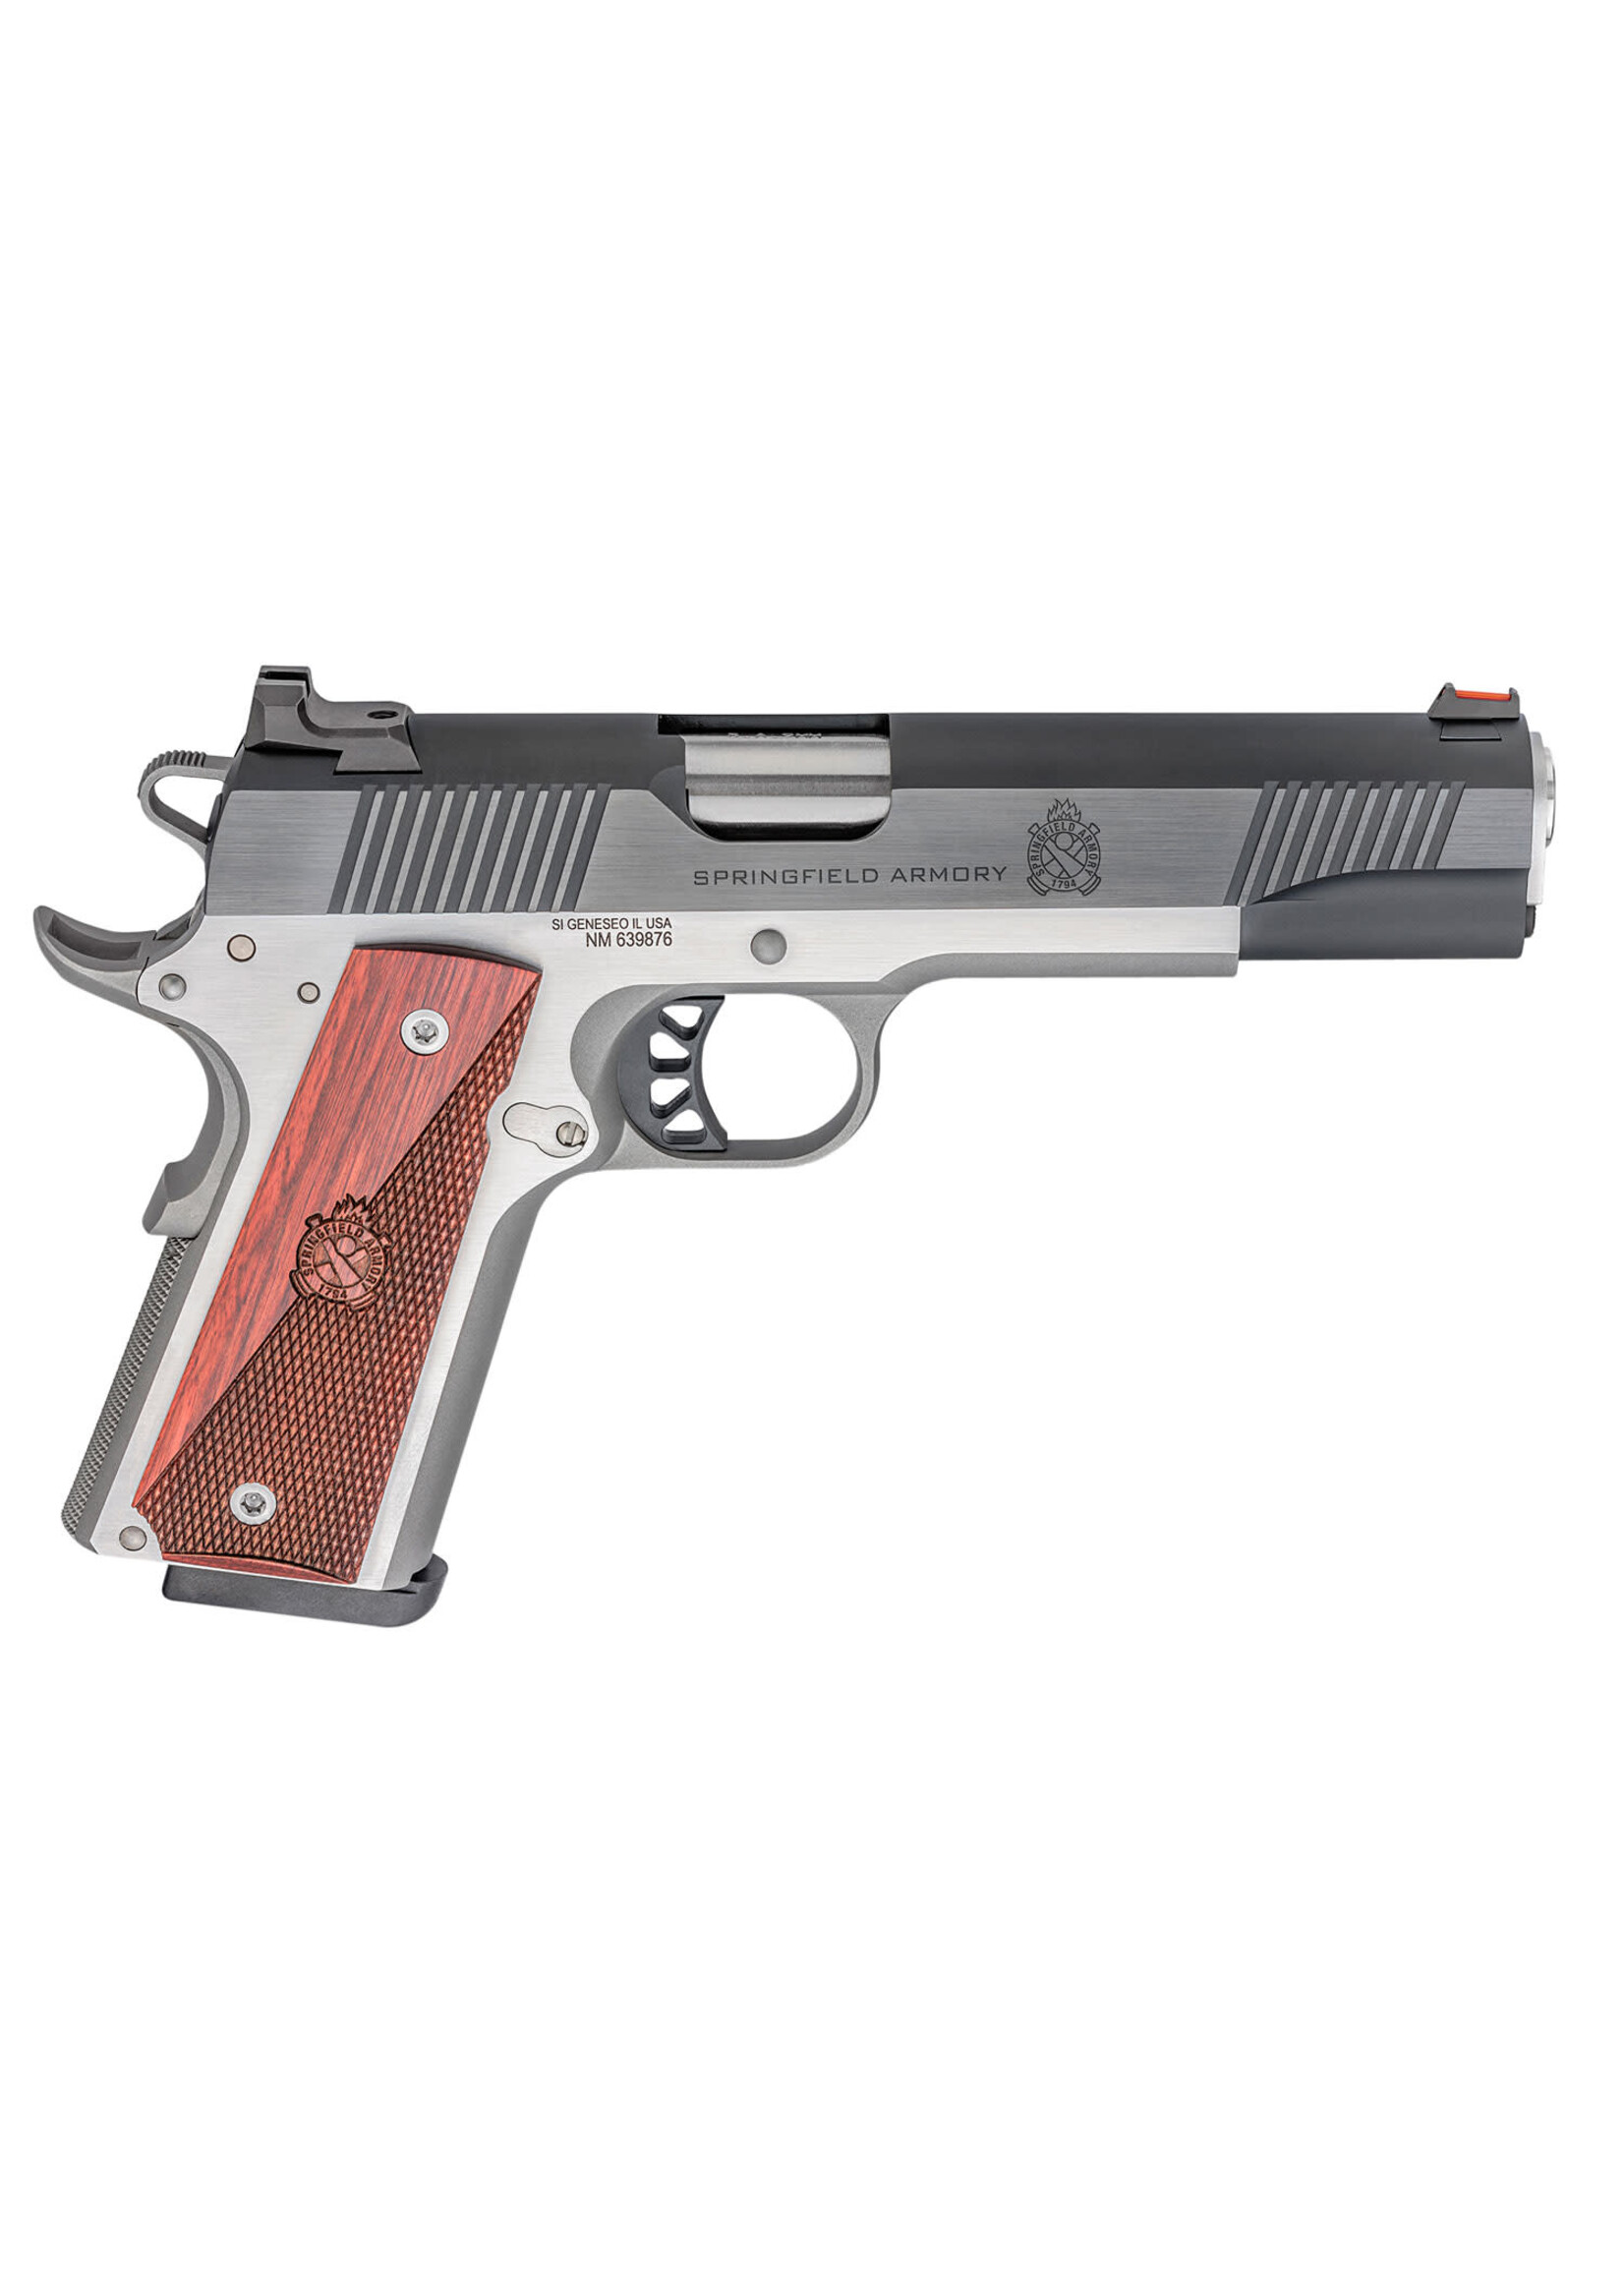 Springfield Armory Springfield Armory PX9119L 1911 Ronin 9mm Luger 9+1, 5" Stainless Match Grade Steel Barrel, Blued Serrated Carbon Steel Slide, Stainless Steel Frame w/Beavertail, Crossed Cannon Wood Grip, Right Hand